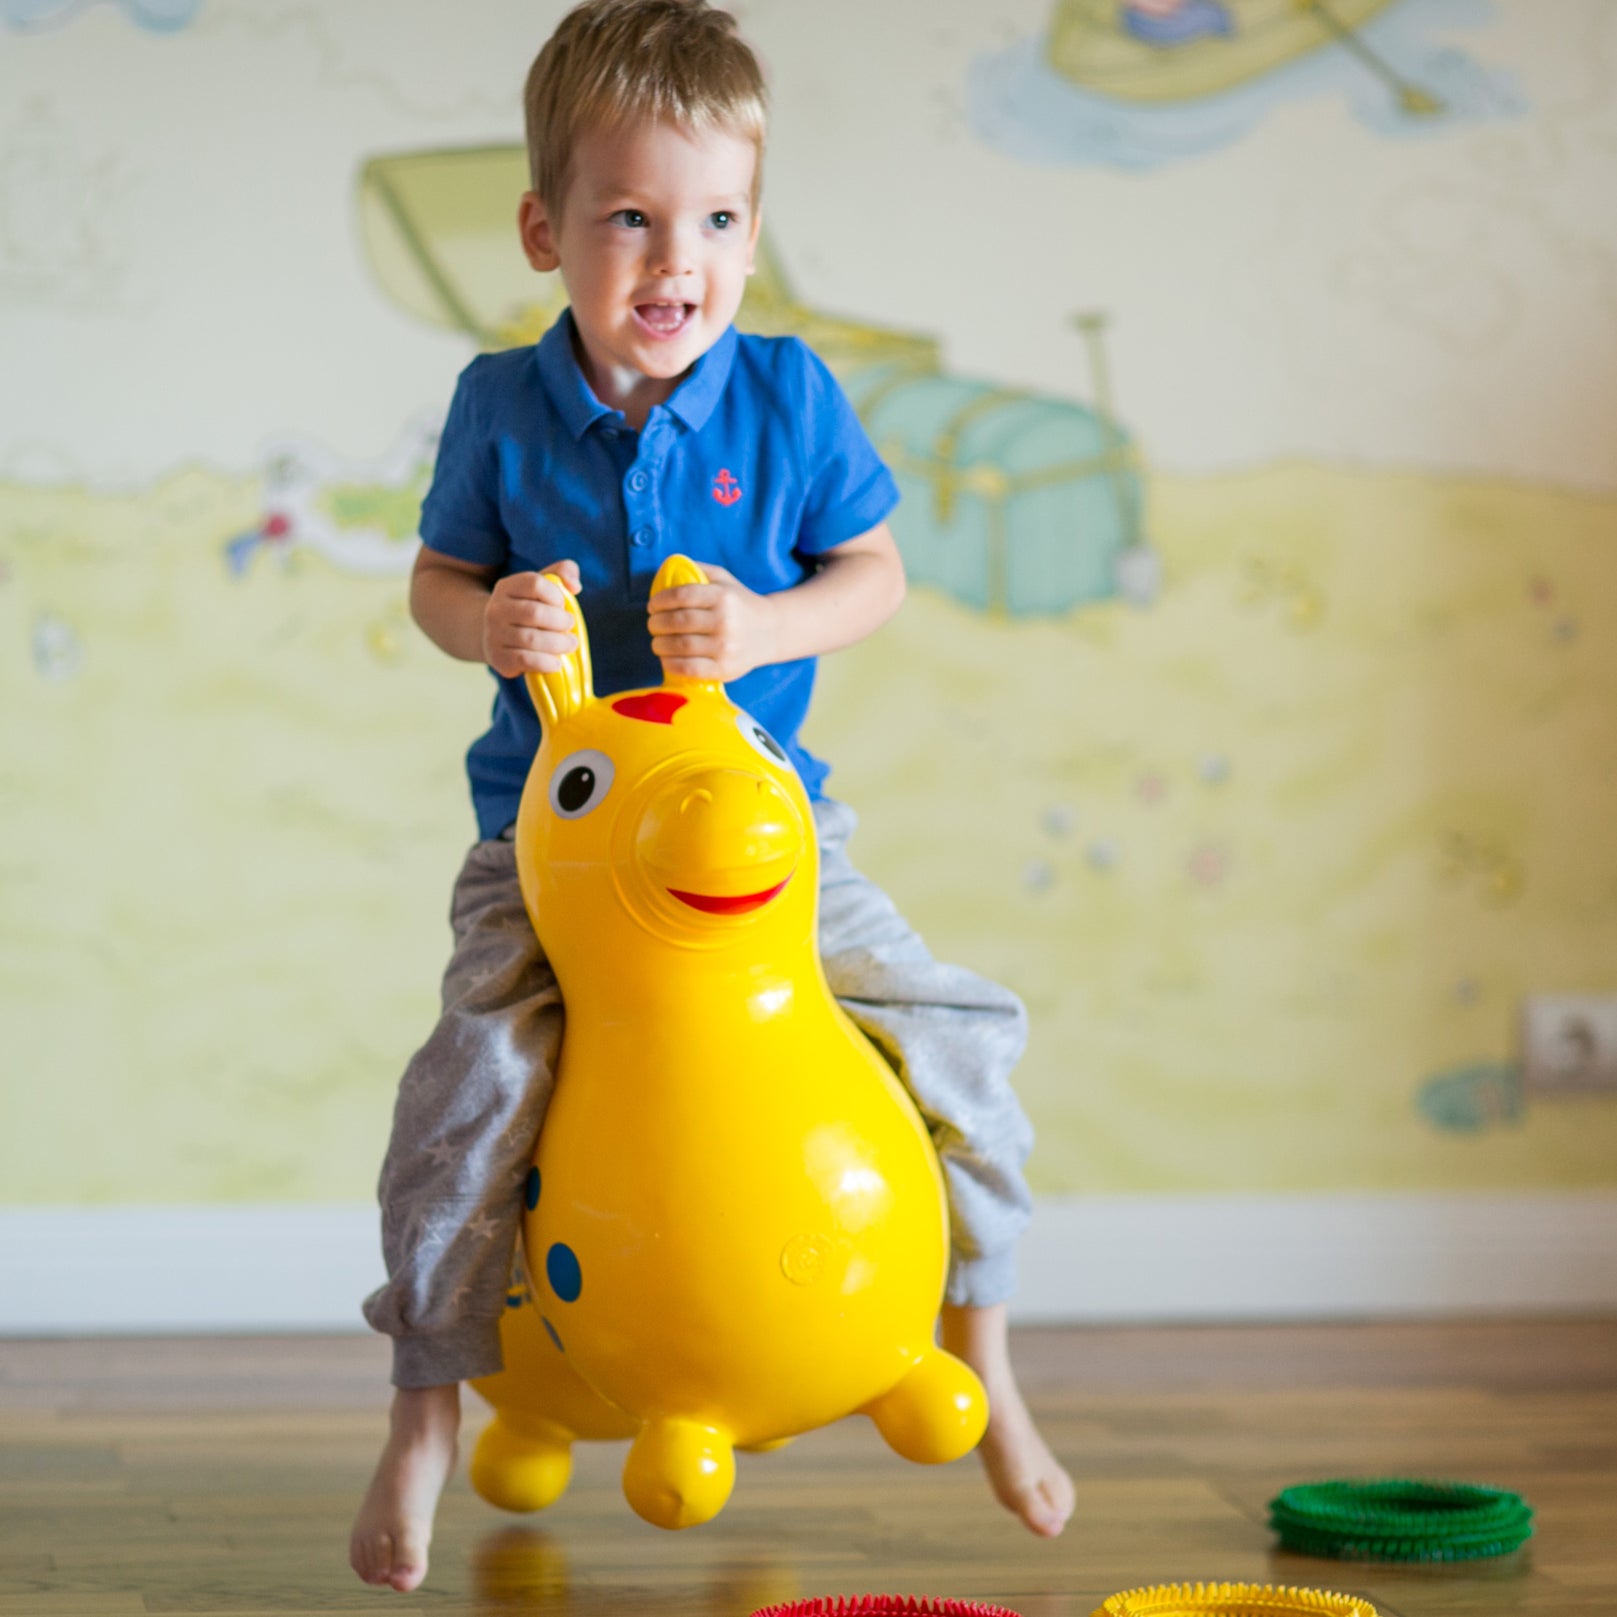 Rody Inflatable Bounce Horse With